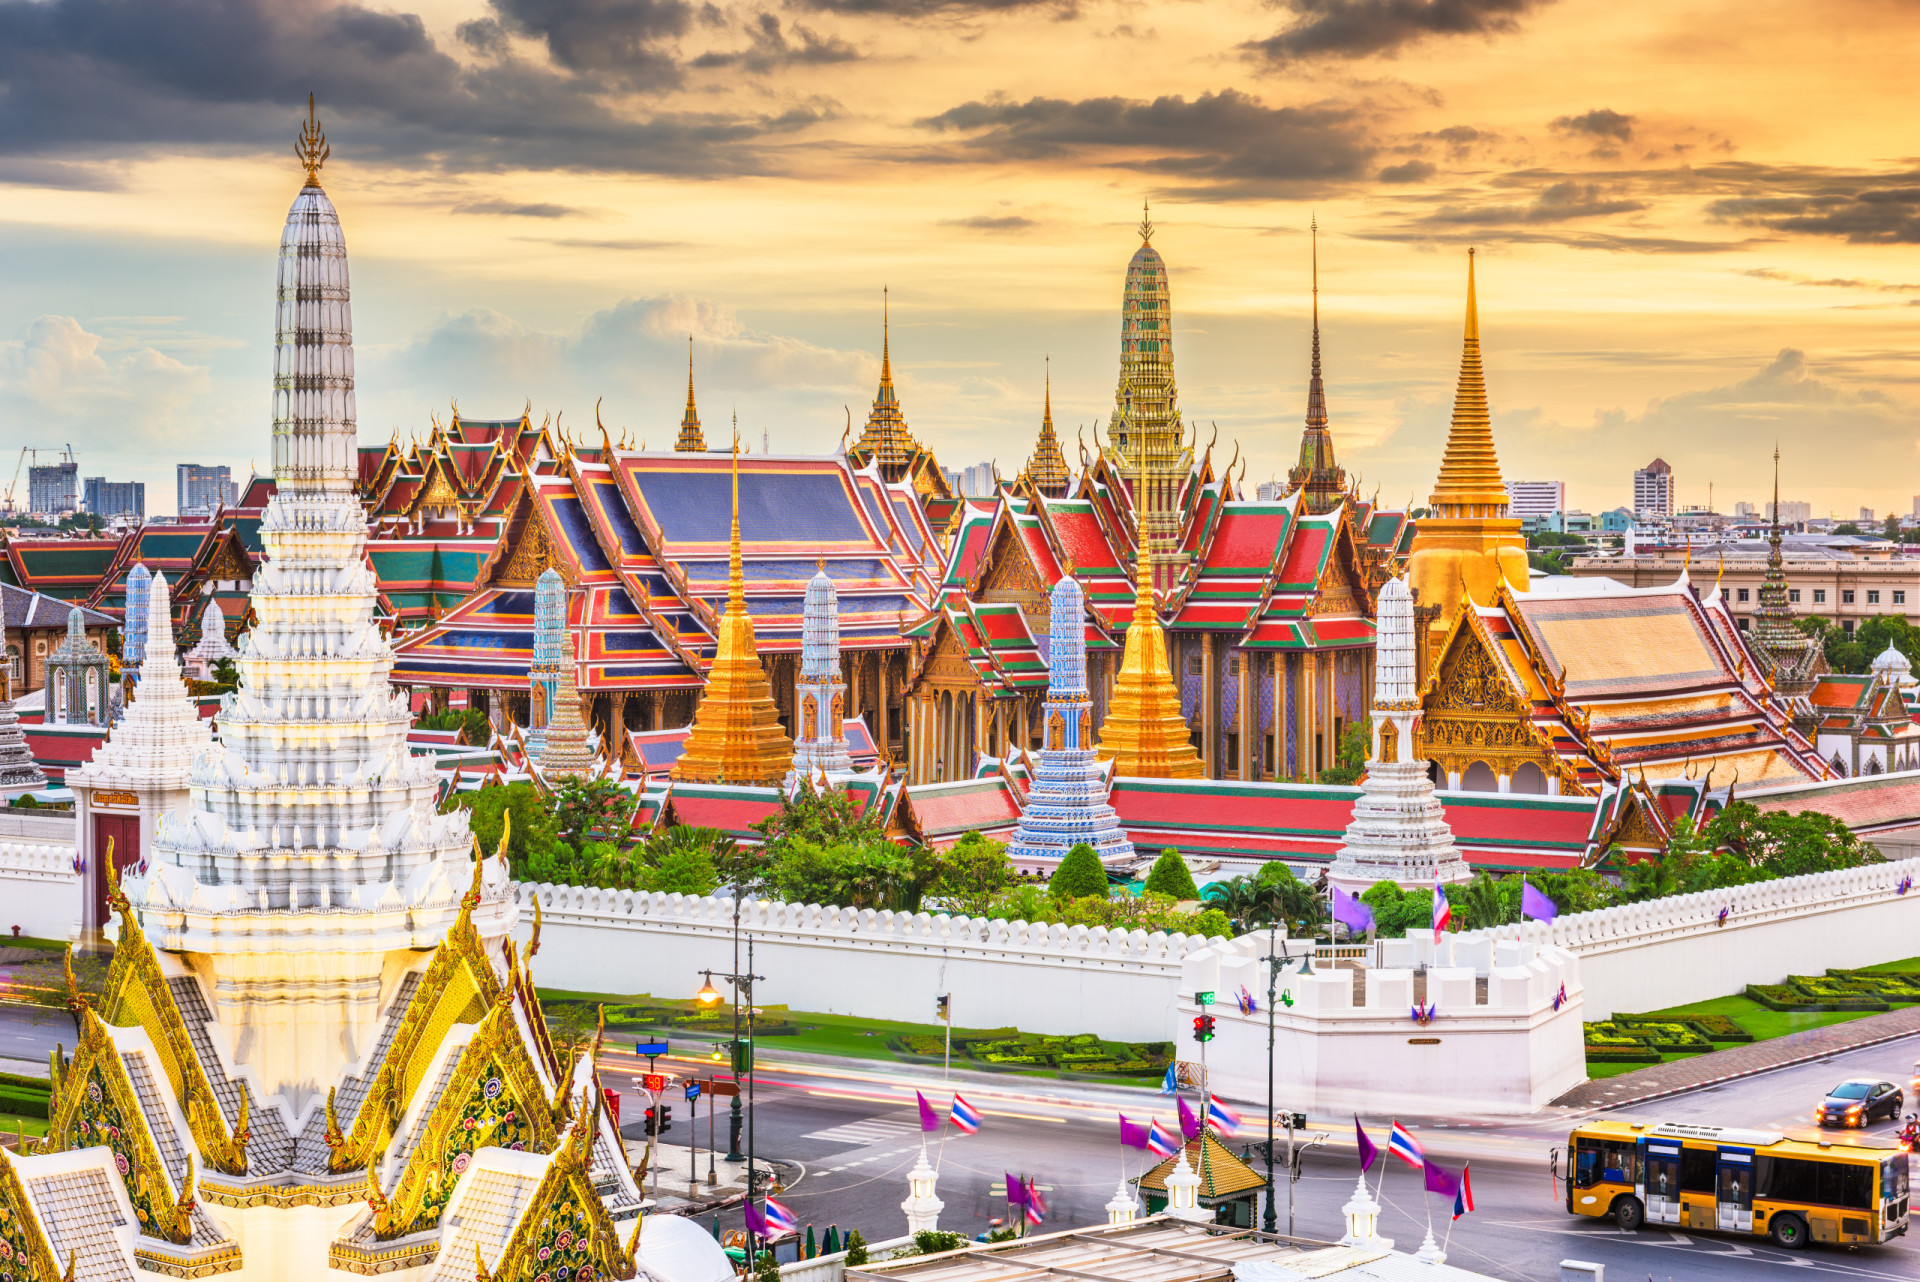 <p>For those seeking big city excitement, Bangkok is hard to beat. The city's nightlife is notoriously heady, but Bangkok is also becoming known as a center of wellness and as an "emerging self-care" destination, according to luxury travel network Virtuoso.</p><p>You may also like:<a href="https://www.starsinsider.com/n/388455?utm_source=msn.com&utm_medium=display&utm_campaign=referral_description&utm_content=636762en-en"> 'Beverly Hills, 90210': Then and now</a></p>